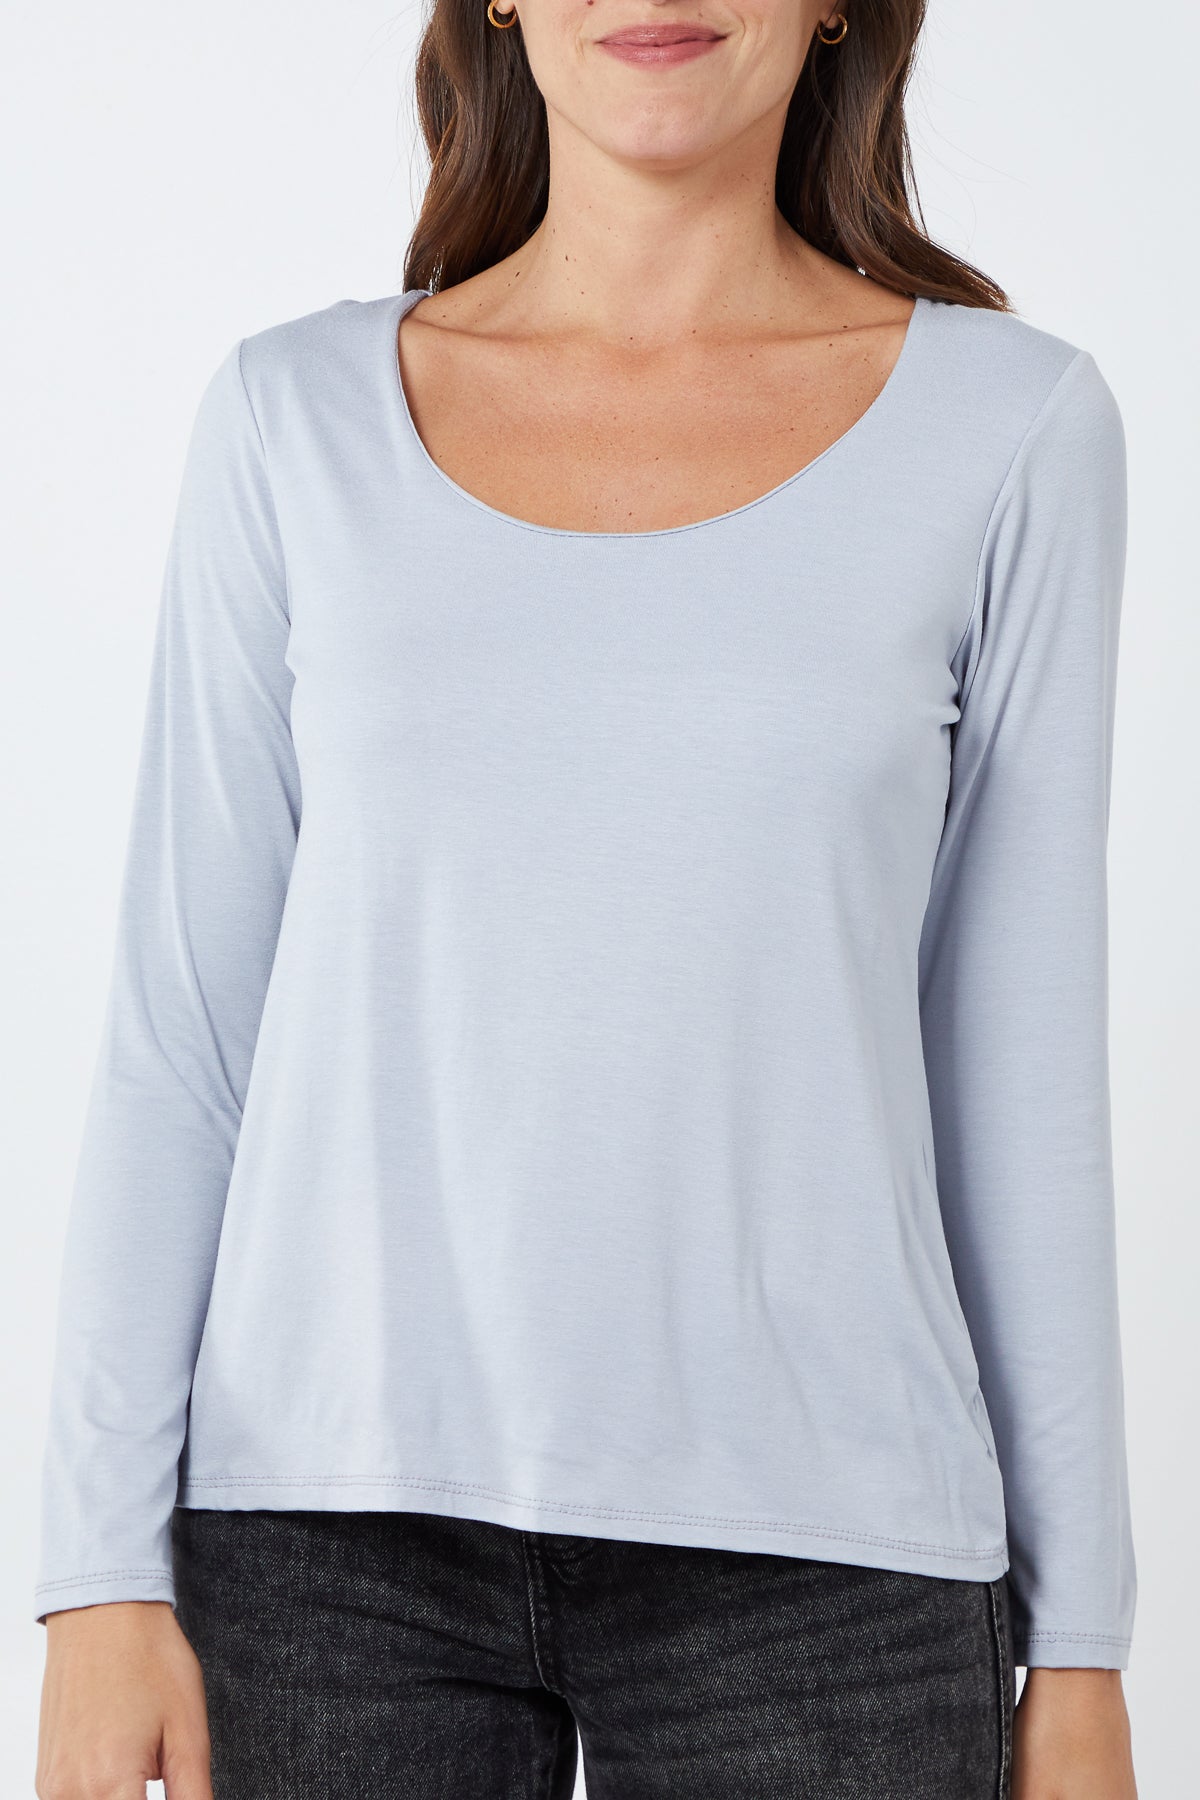 Basic Double Layer Scoop Neck Long Sleeve Top